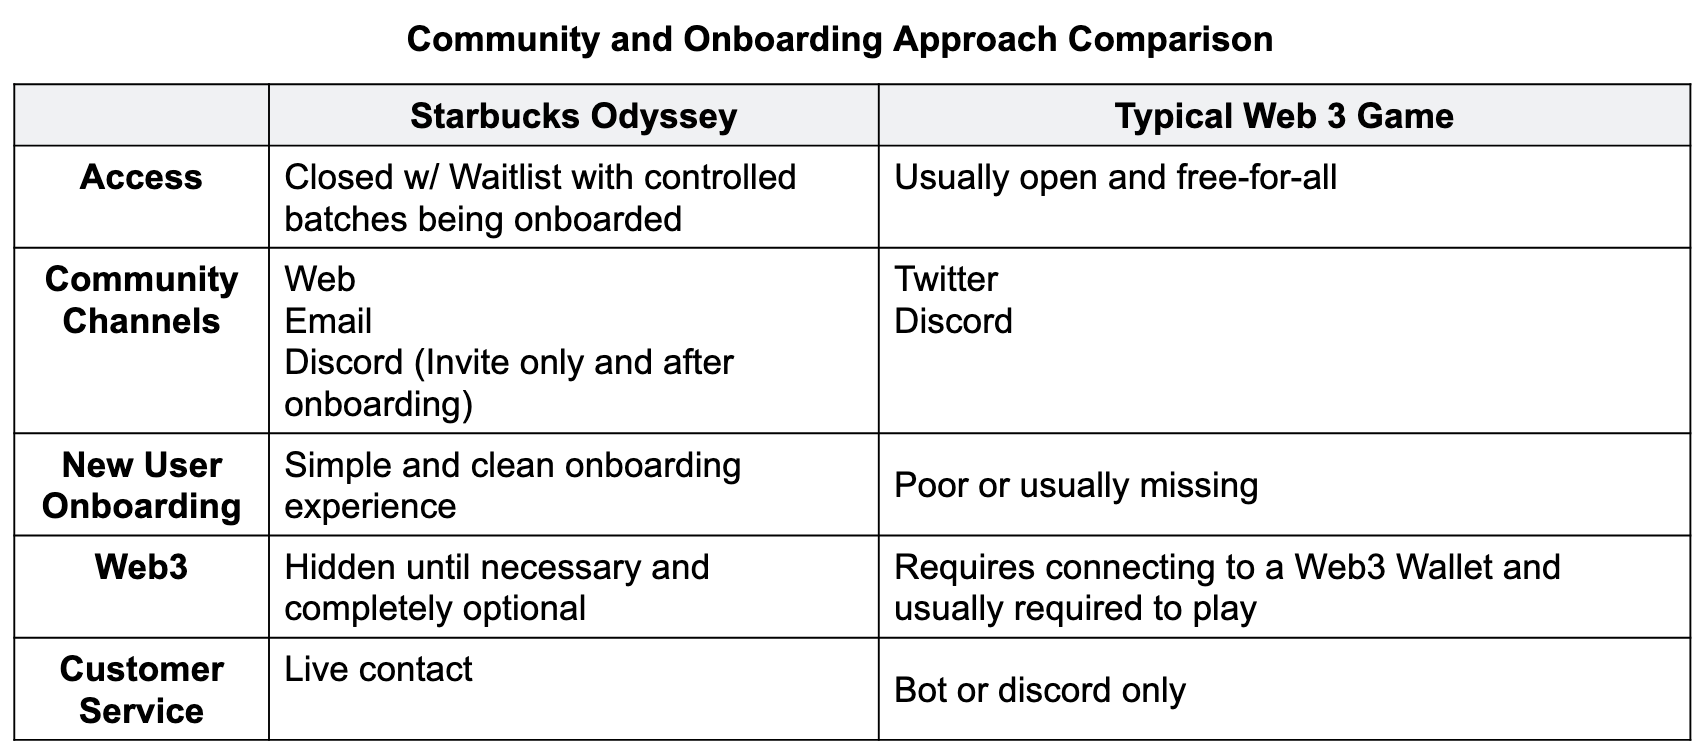 Community and Onboarding Approach Comparison